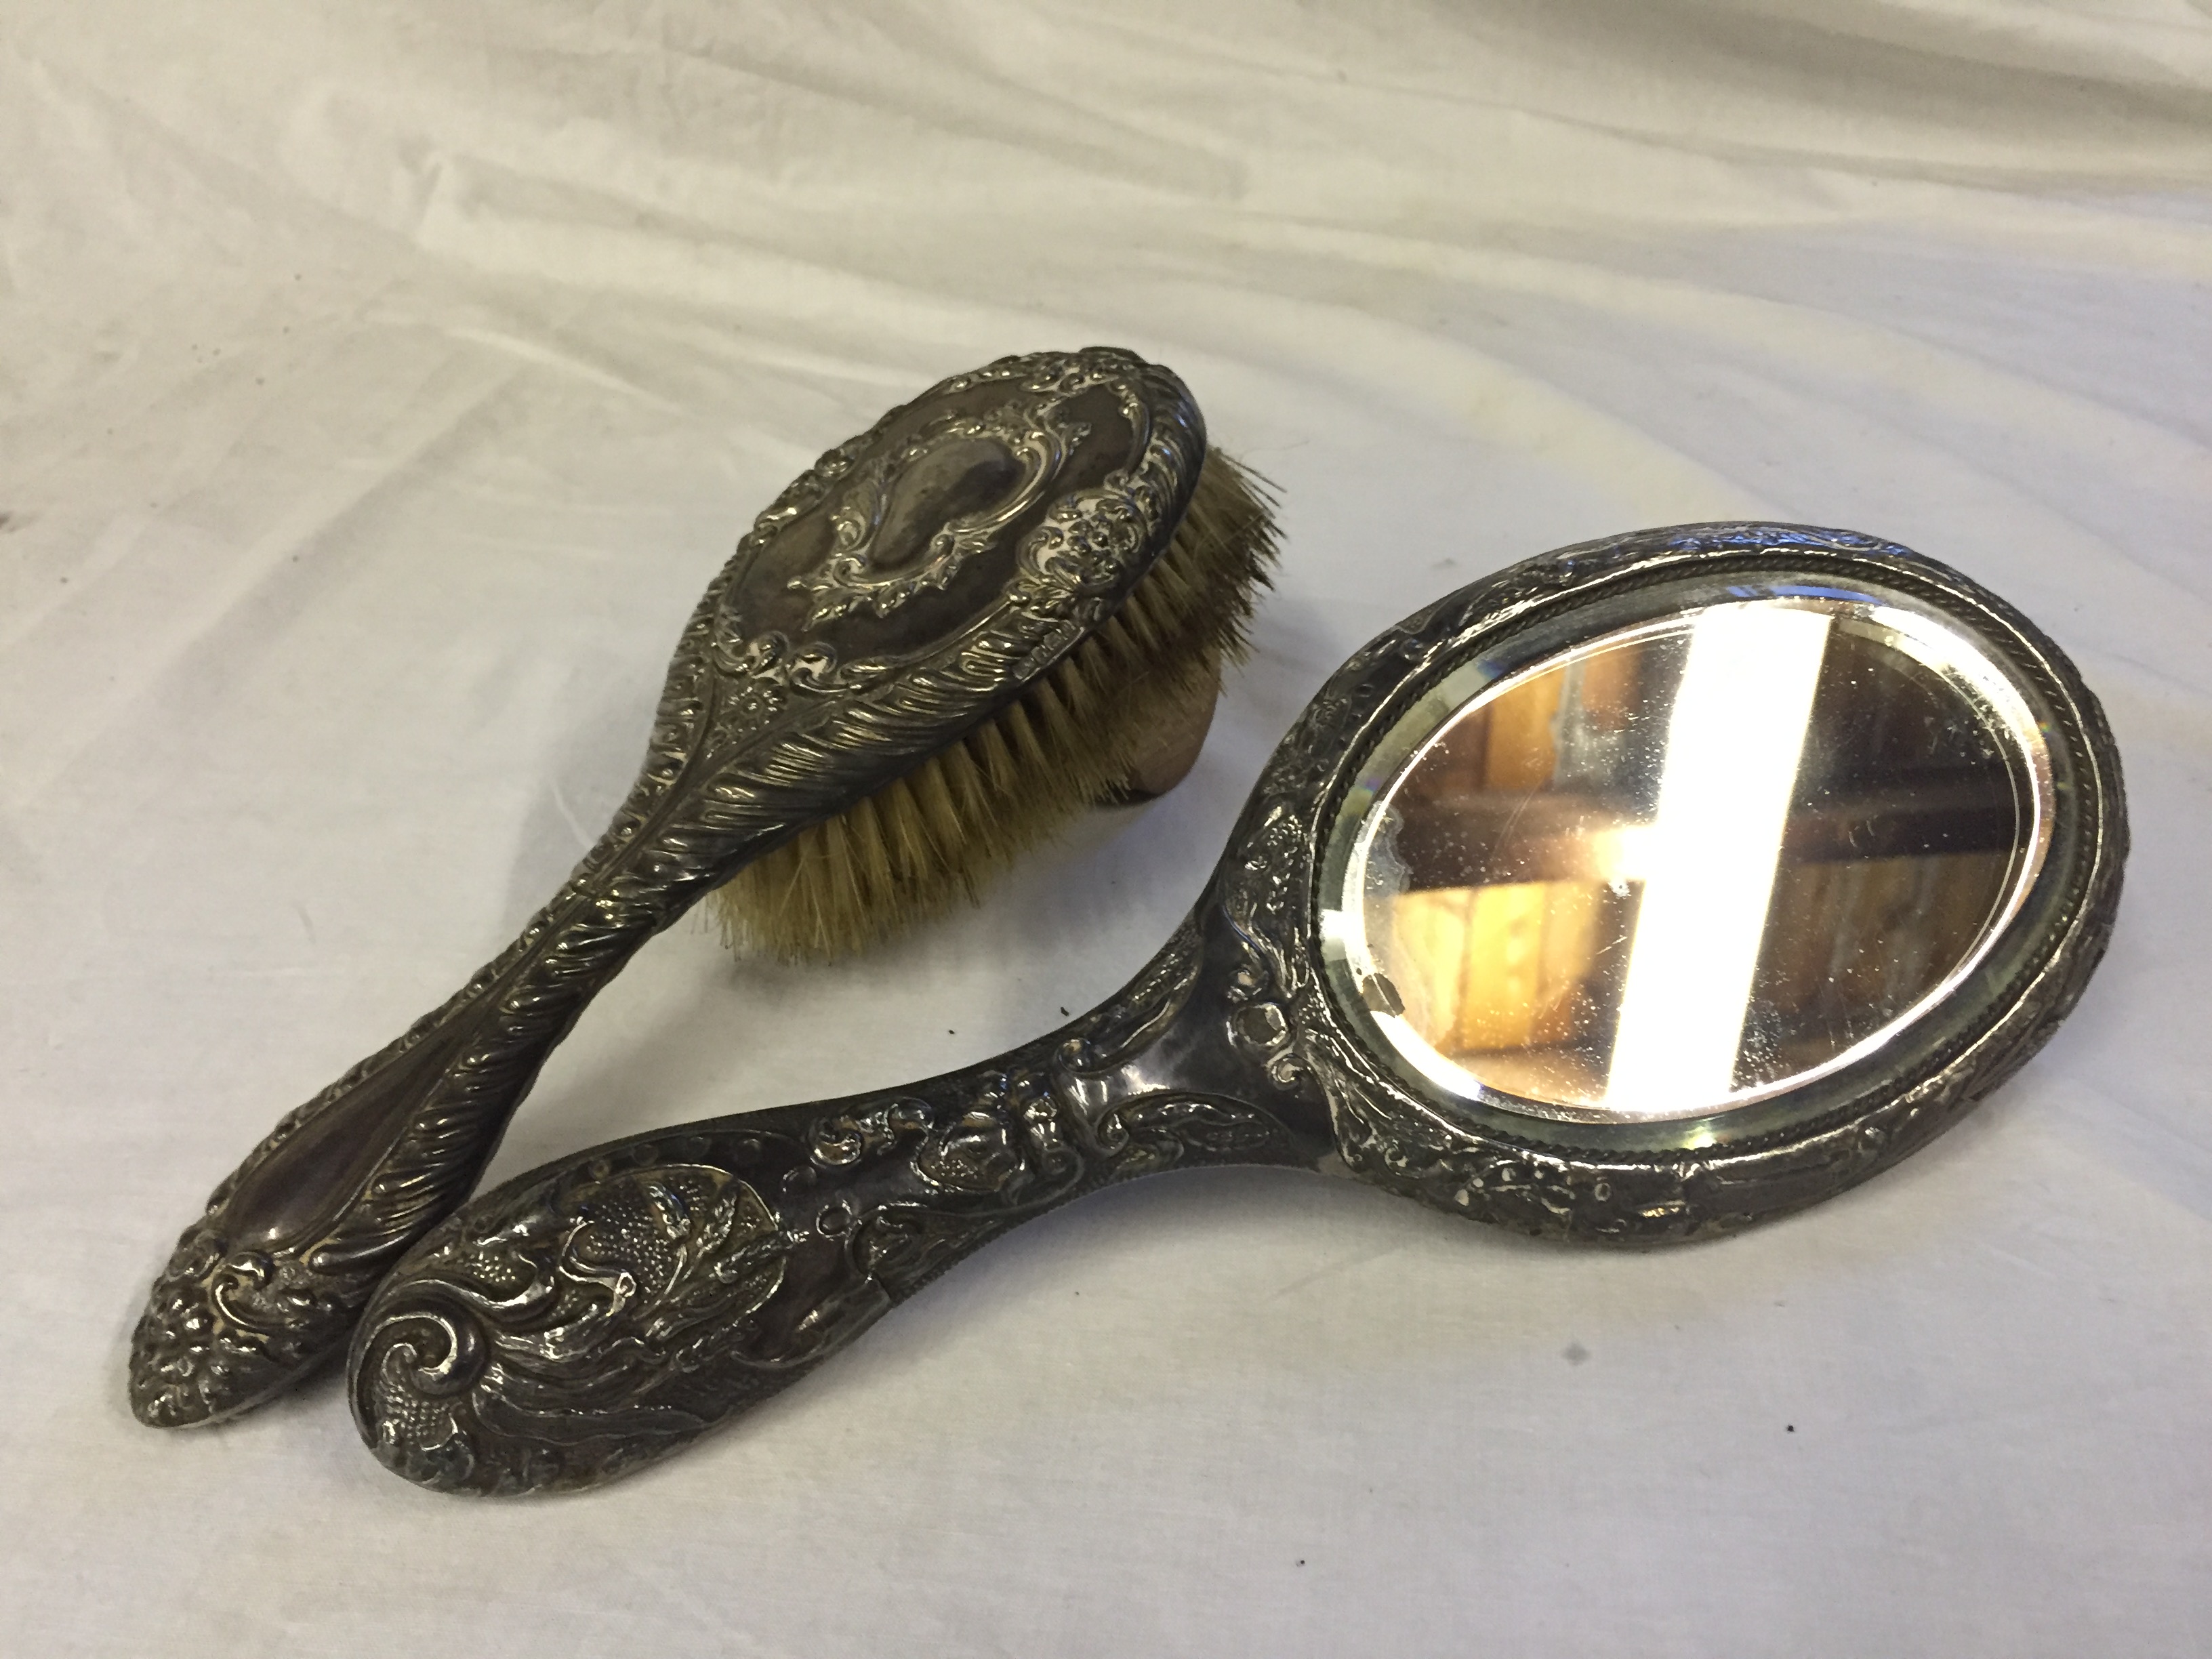 A sterling silver hairbrush and mirror.